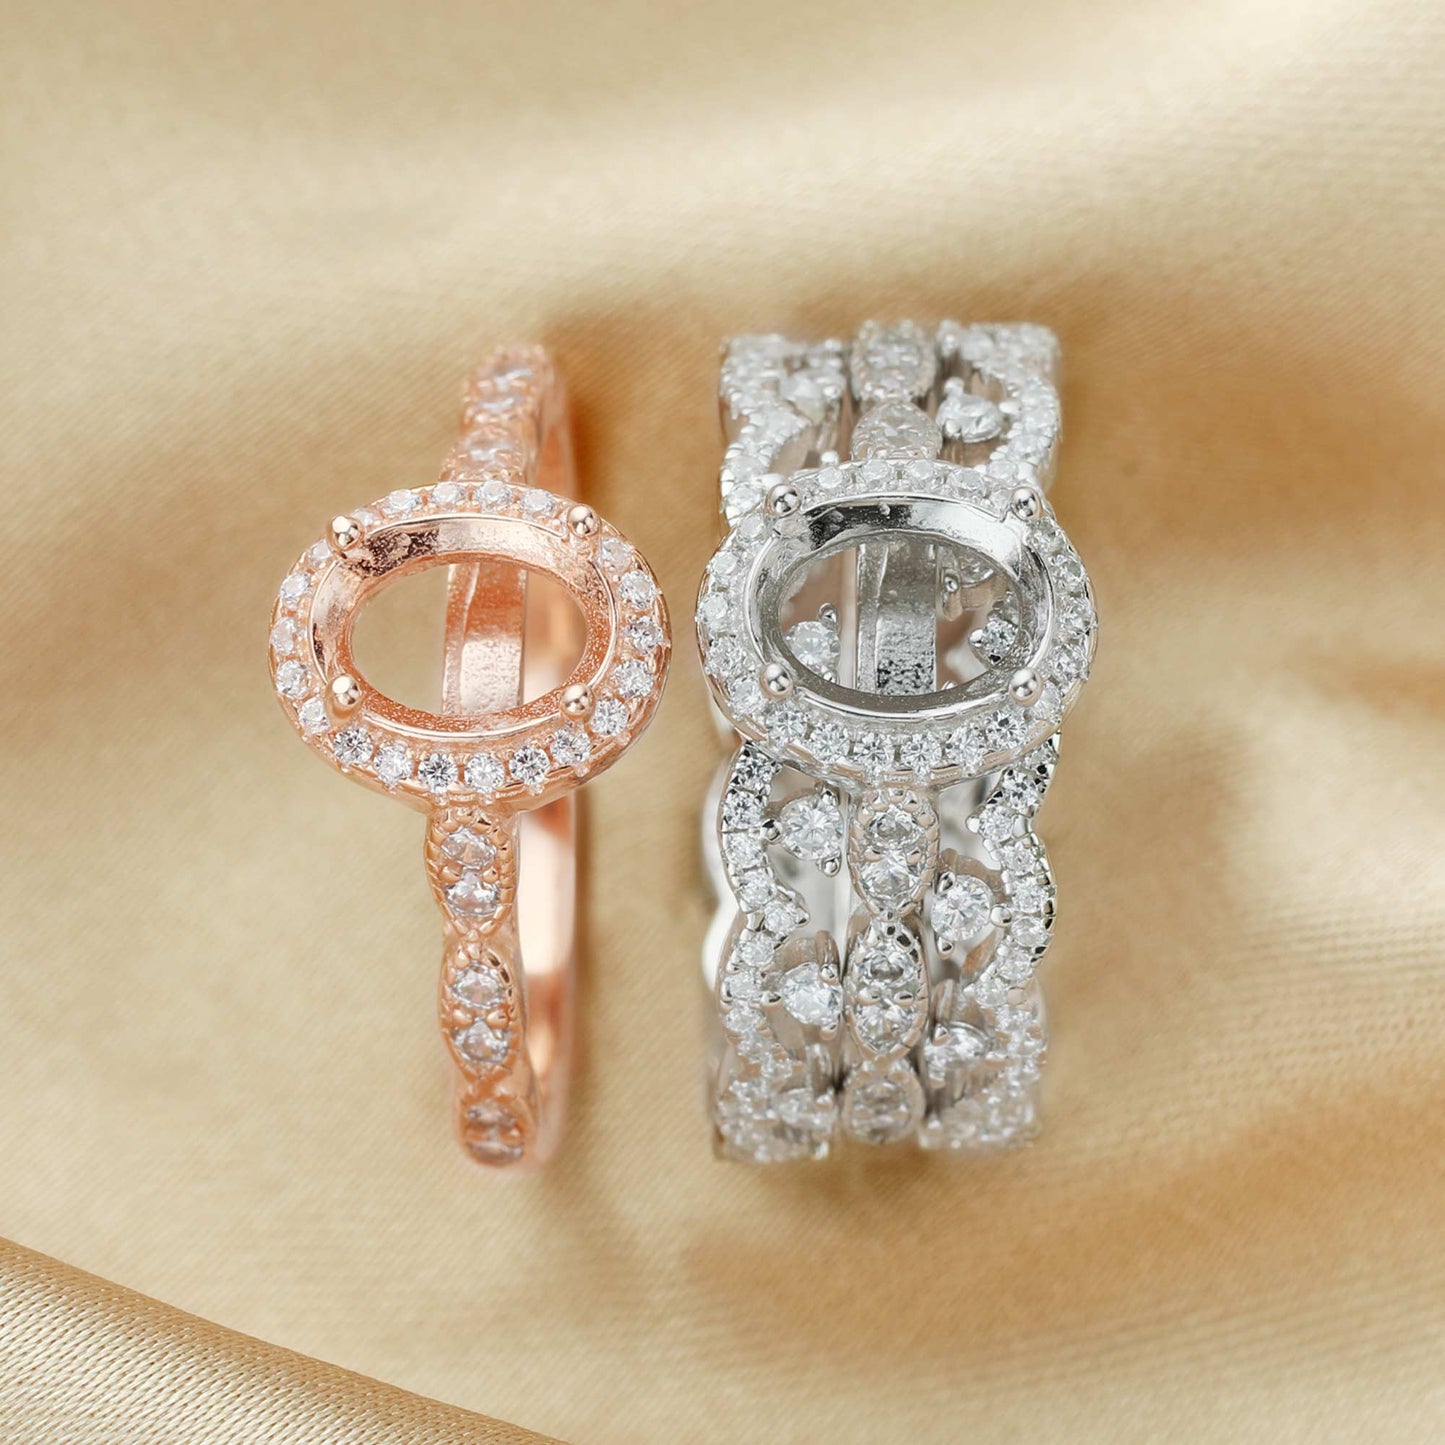 Silver 3 Piece wedding semi mount set  and rose gold halo engagement ring.